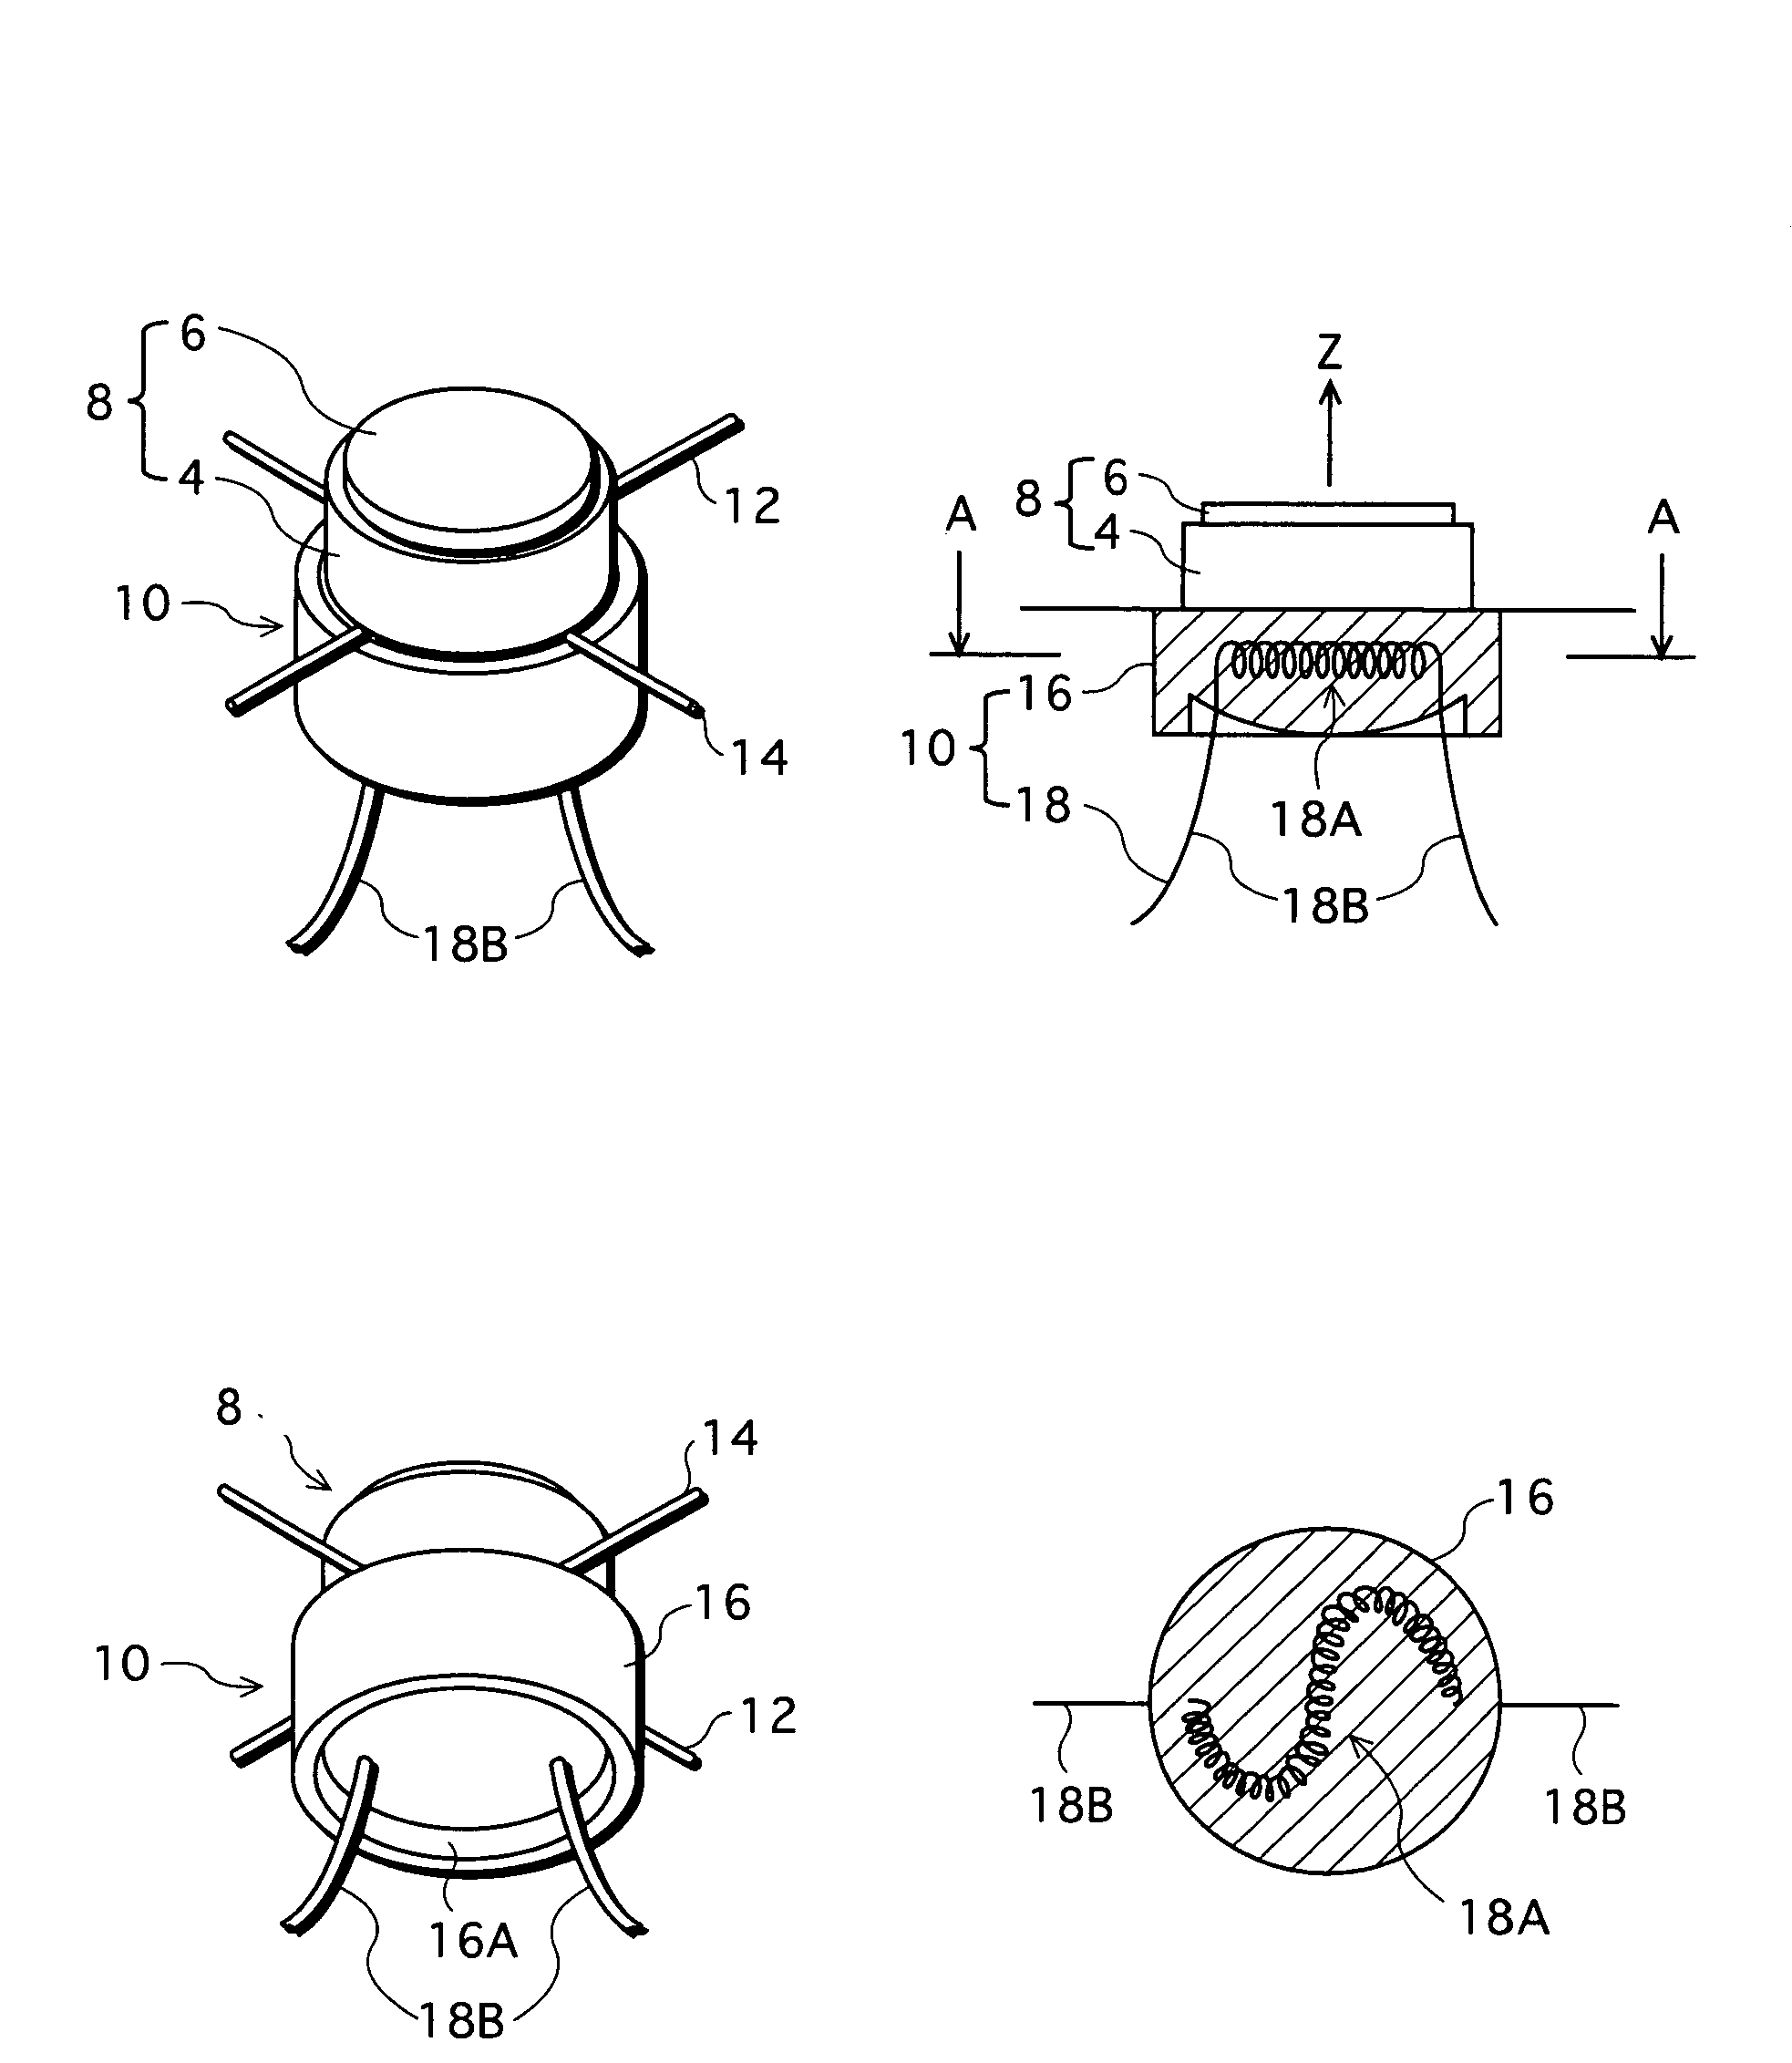 Cathode structure including barrier for preventing metal bridging from heater to emitter